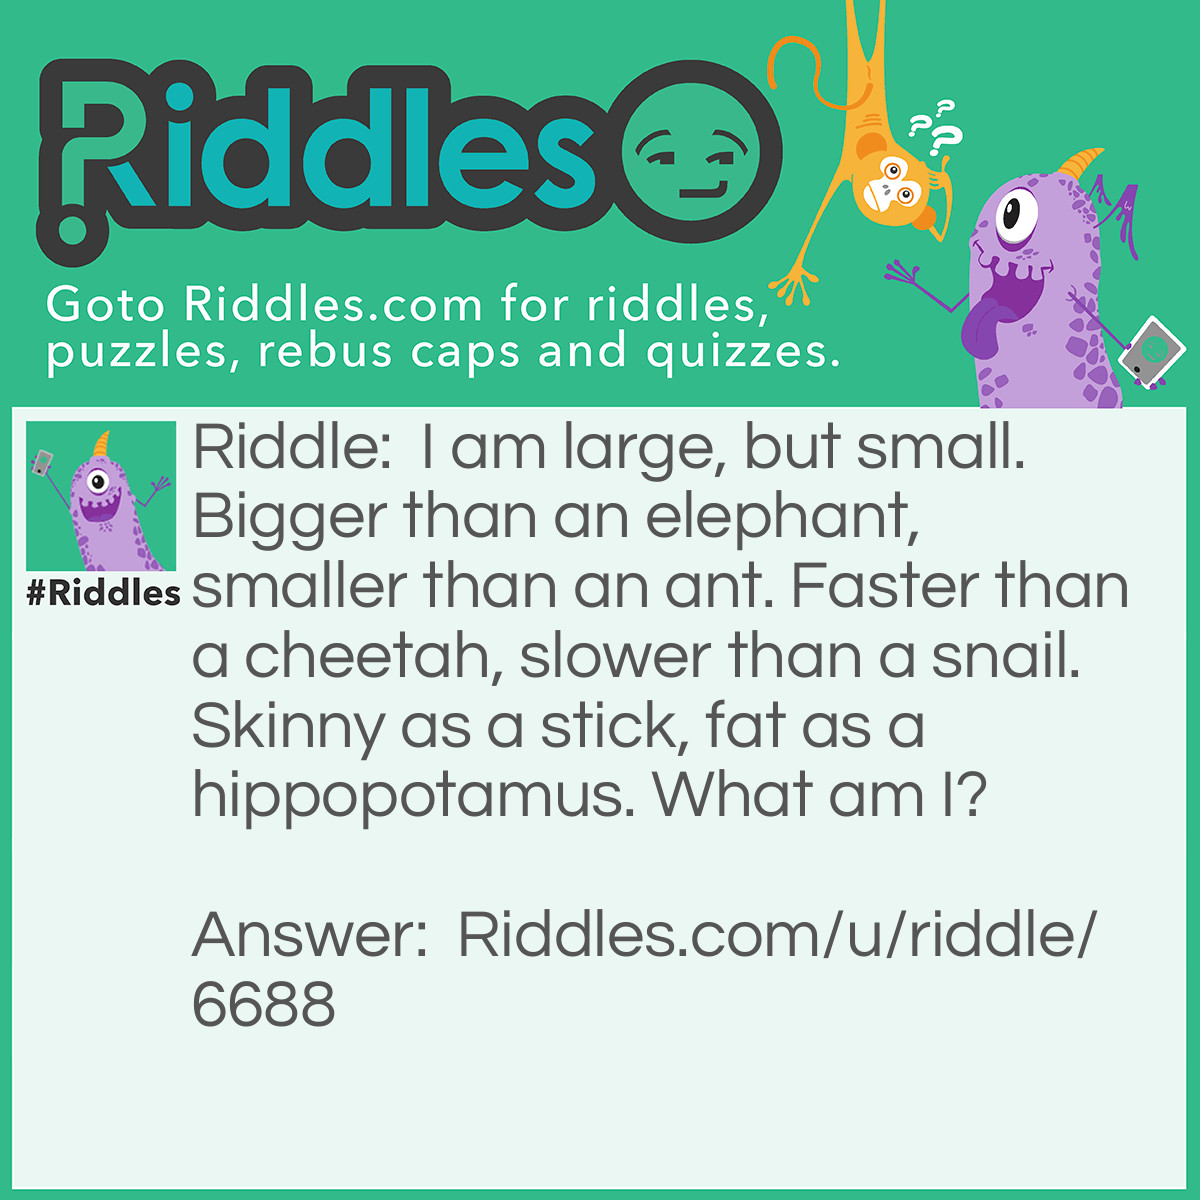 Riddle: I am large, but small. Bigger than an elephant, smaller than an ant. Faster than a cheetah, slower than a snail. Skinny as a stick, fat as a hippopotamus. What am I? Answer: A shadow!